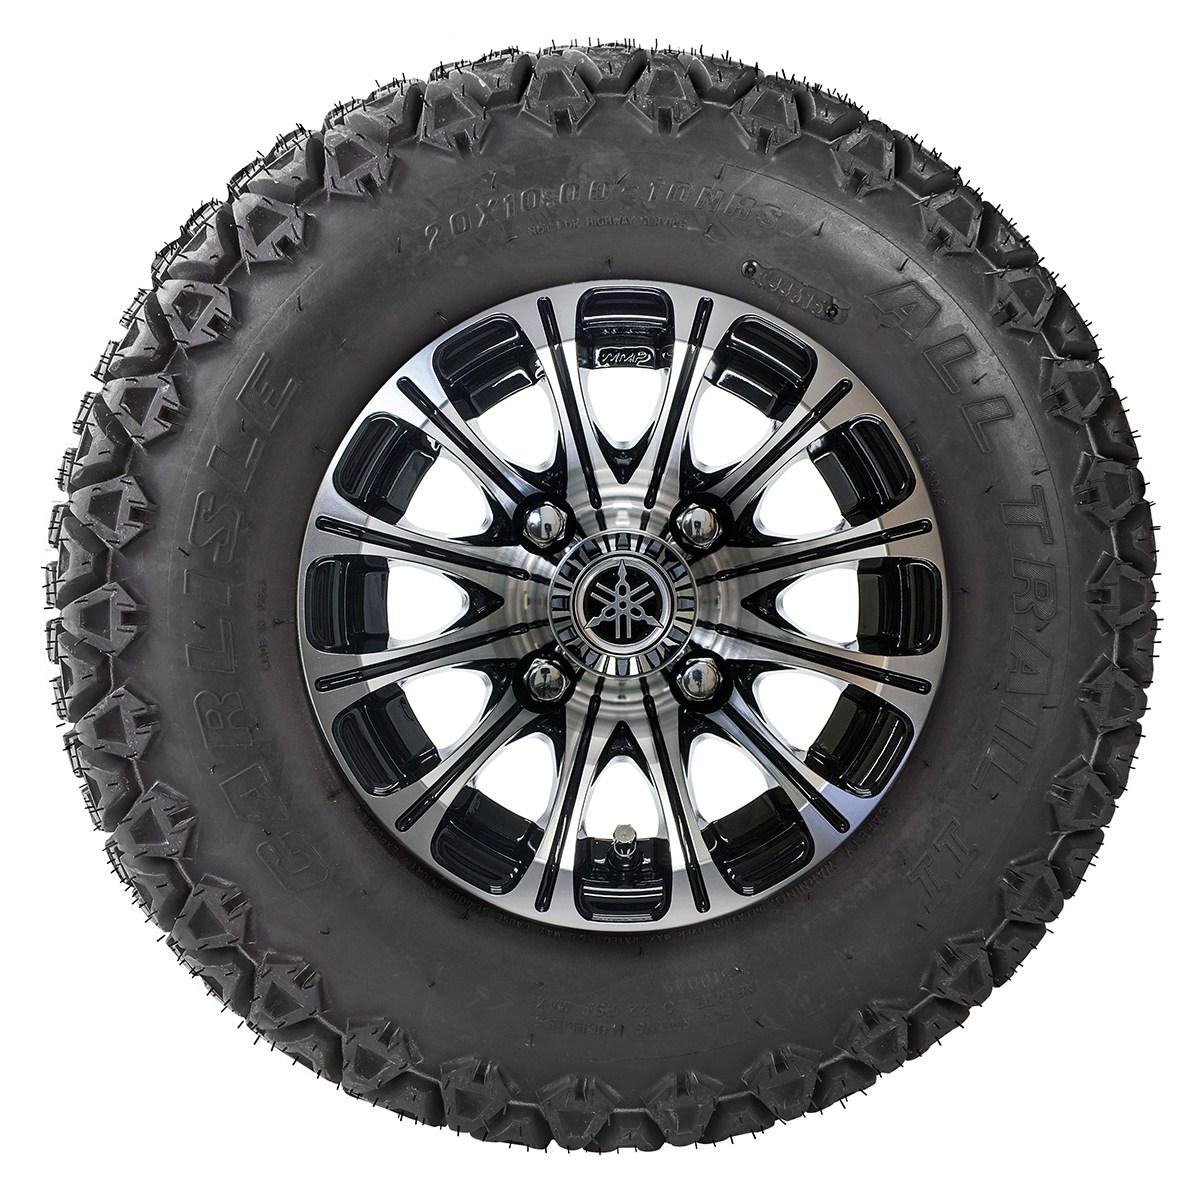 Make going off trail a breeze with this 12-Spoke J-Series All-Terrain Alloy Wheel Assembly that offers increased traction in a ready-to-rumble package!